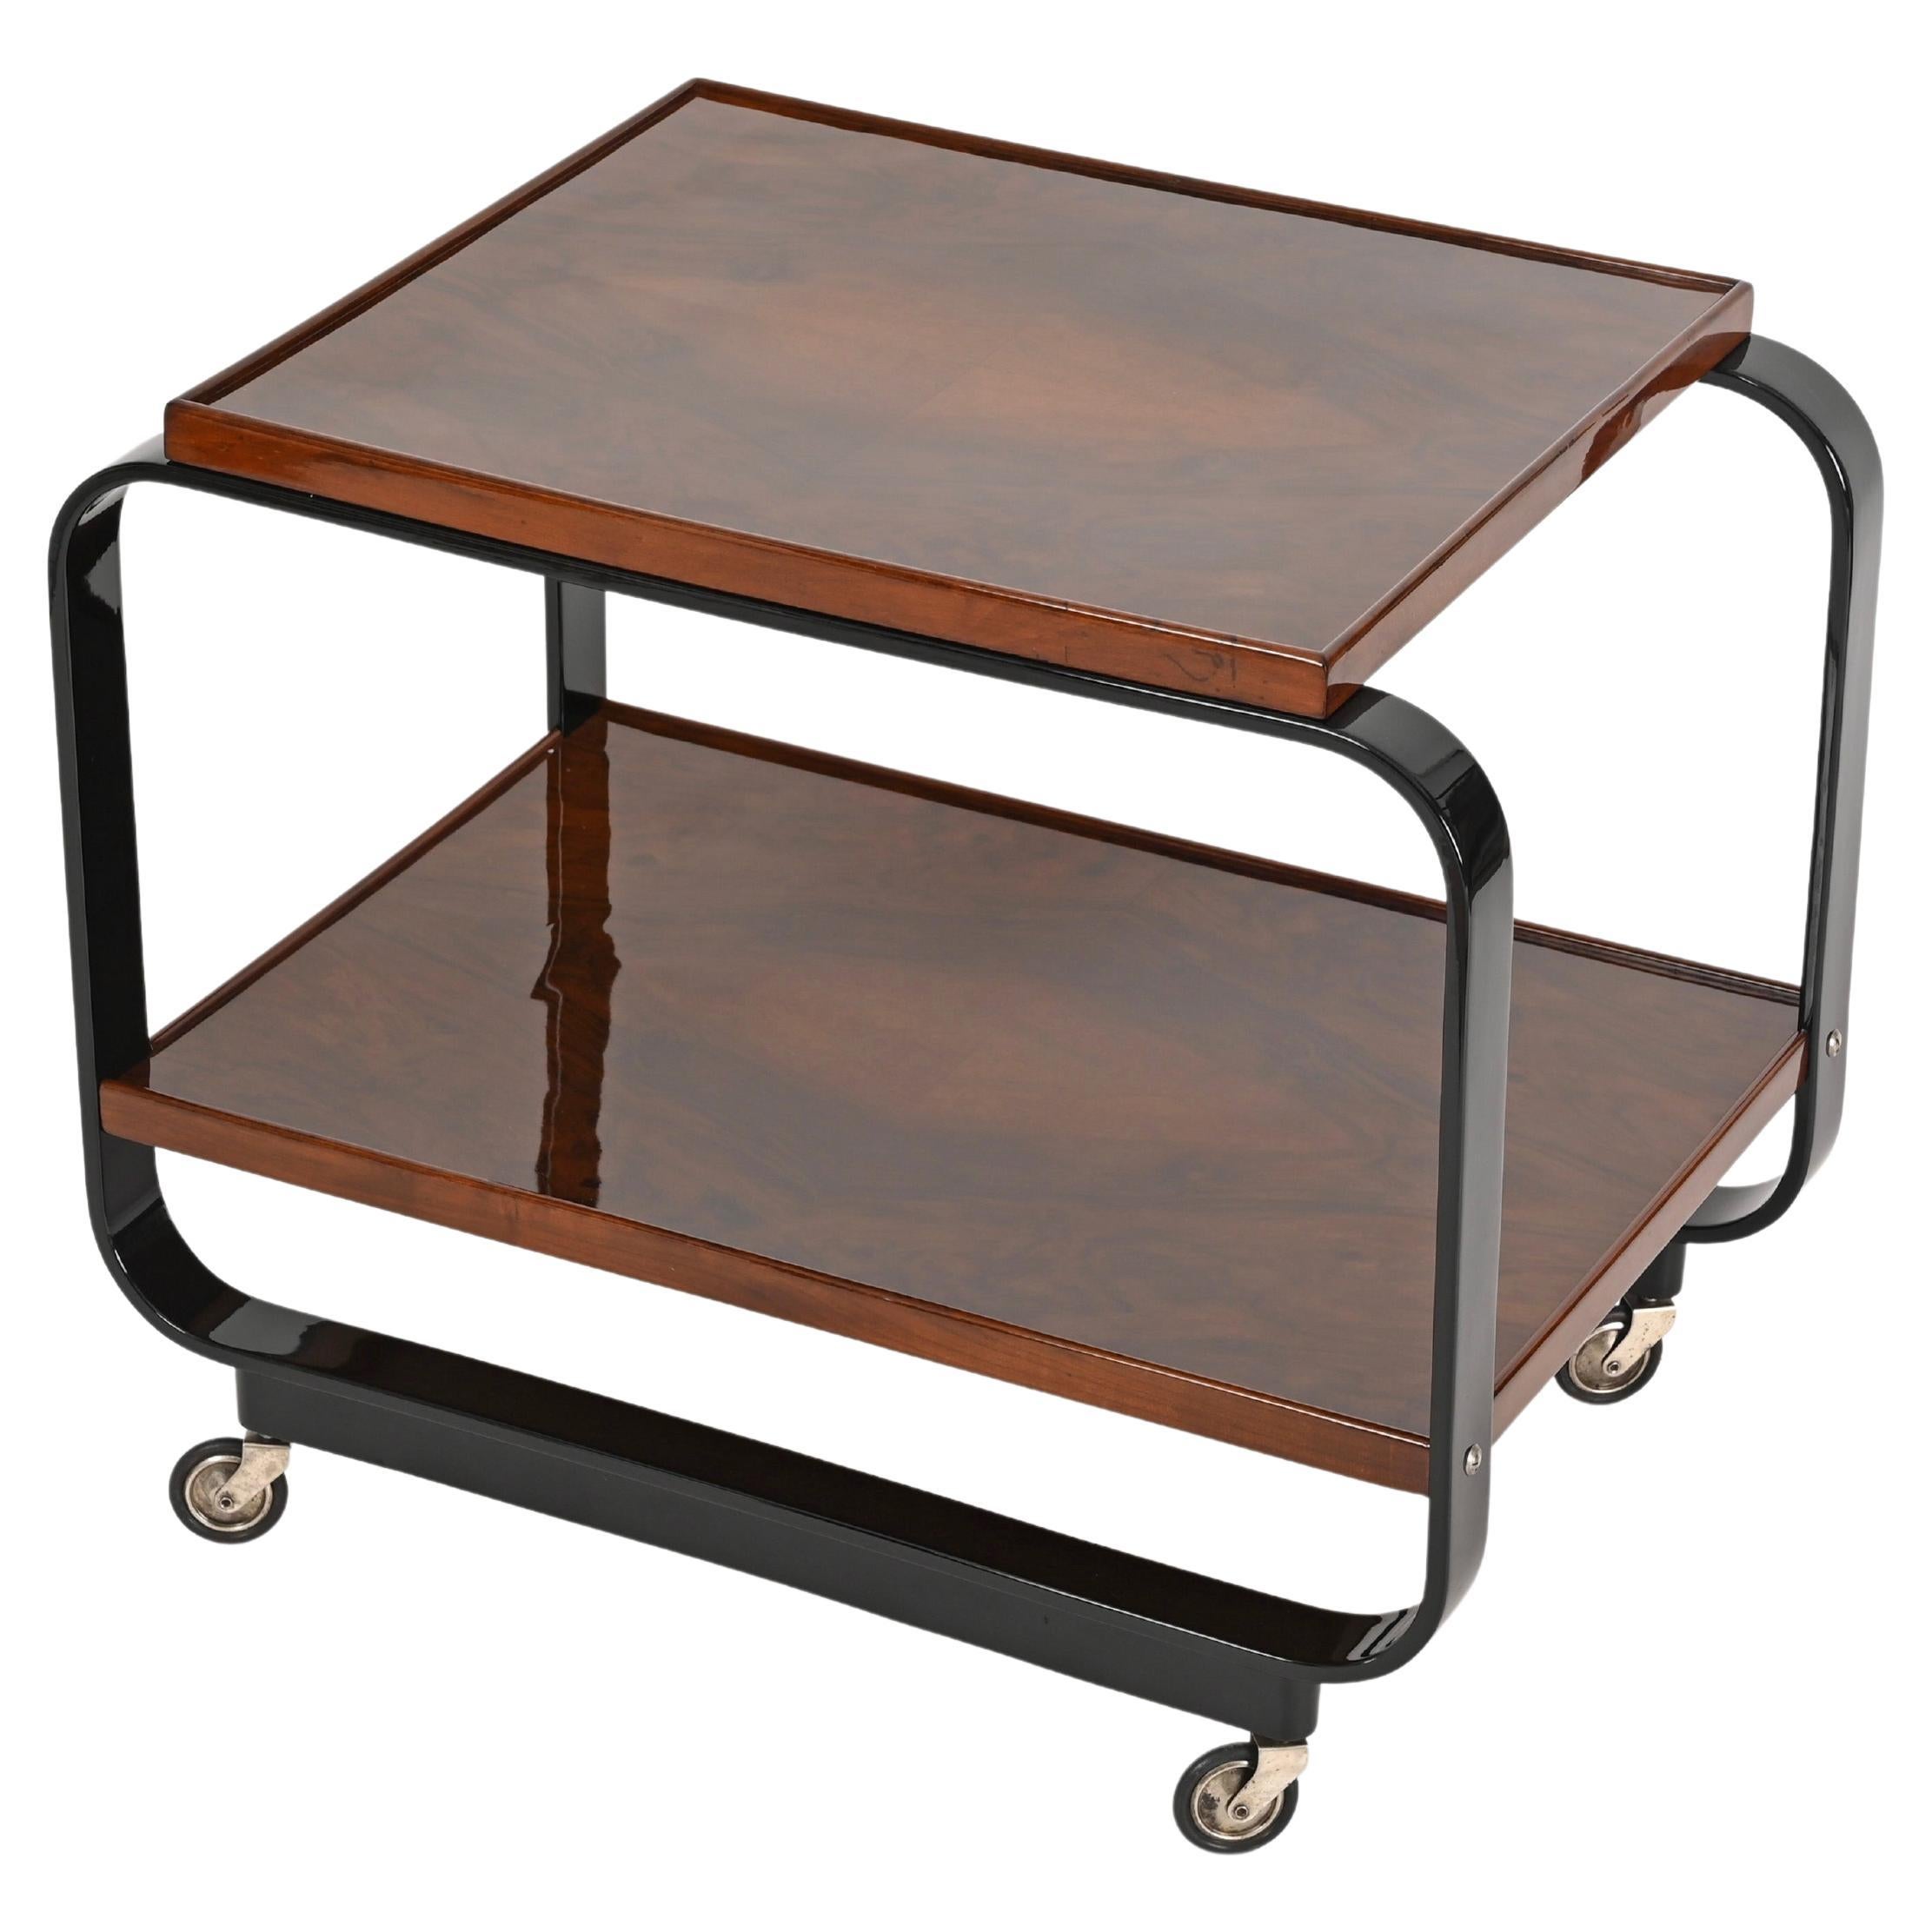 Serving Bar Cart by Gino Maggioni Signed, Bent Curly Walnut Wood, Italy, 1930s